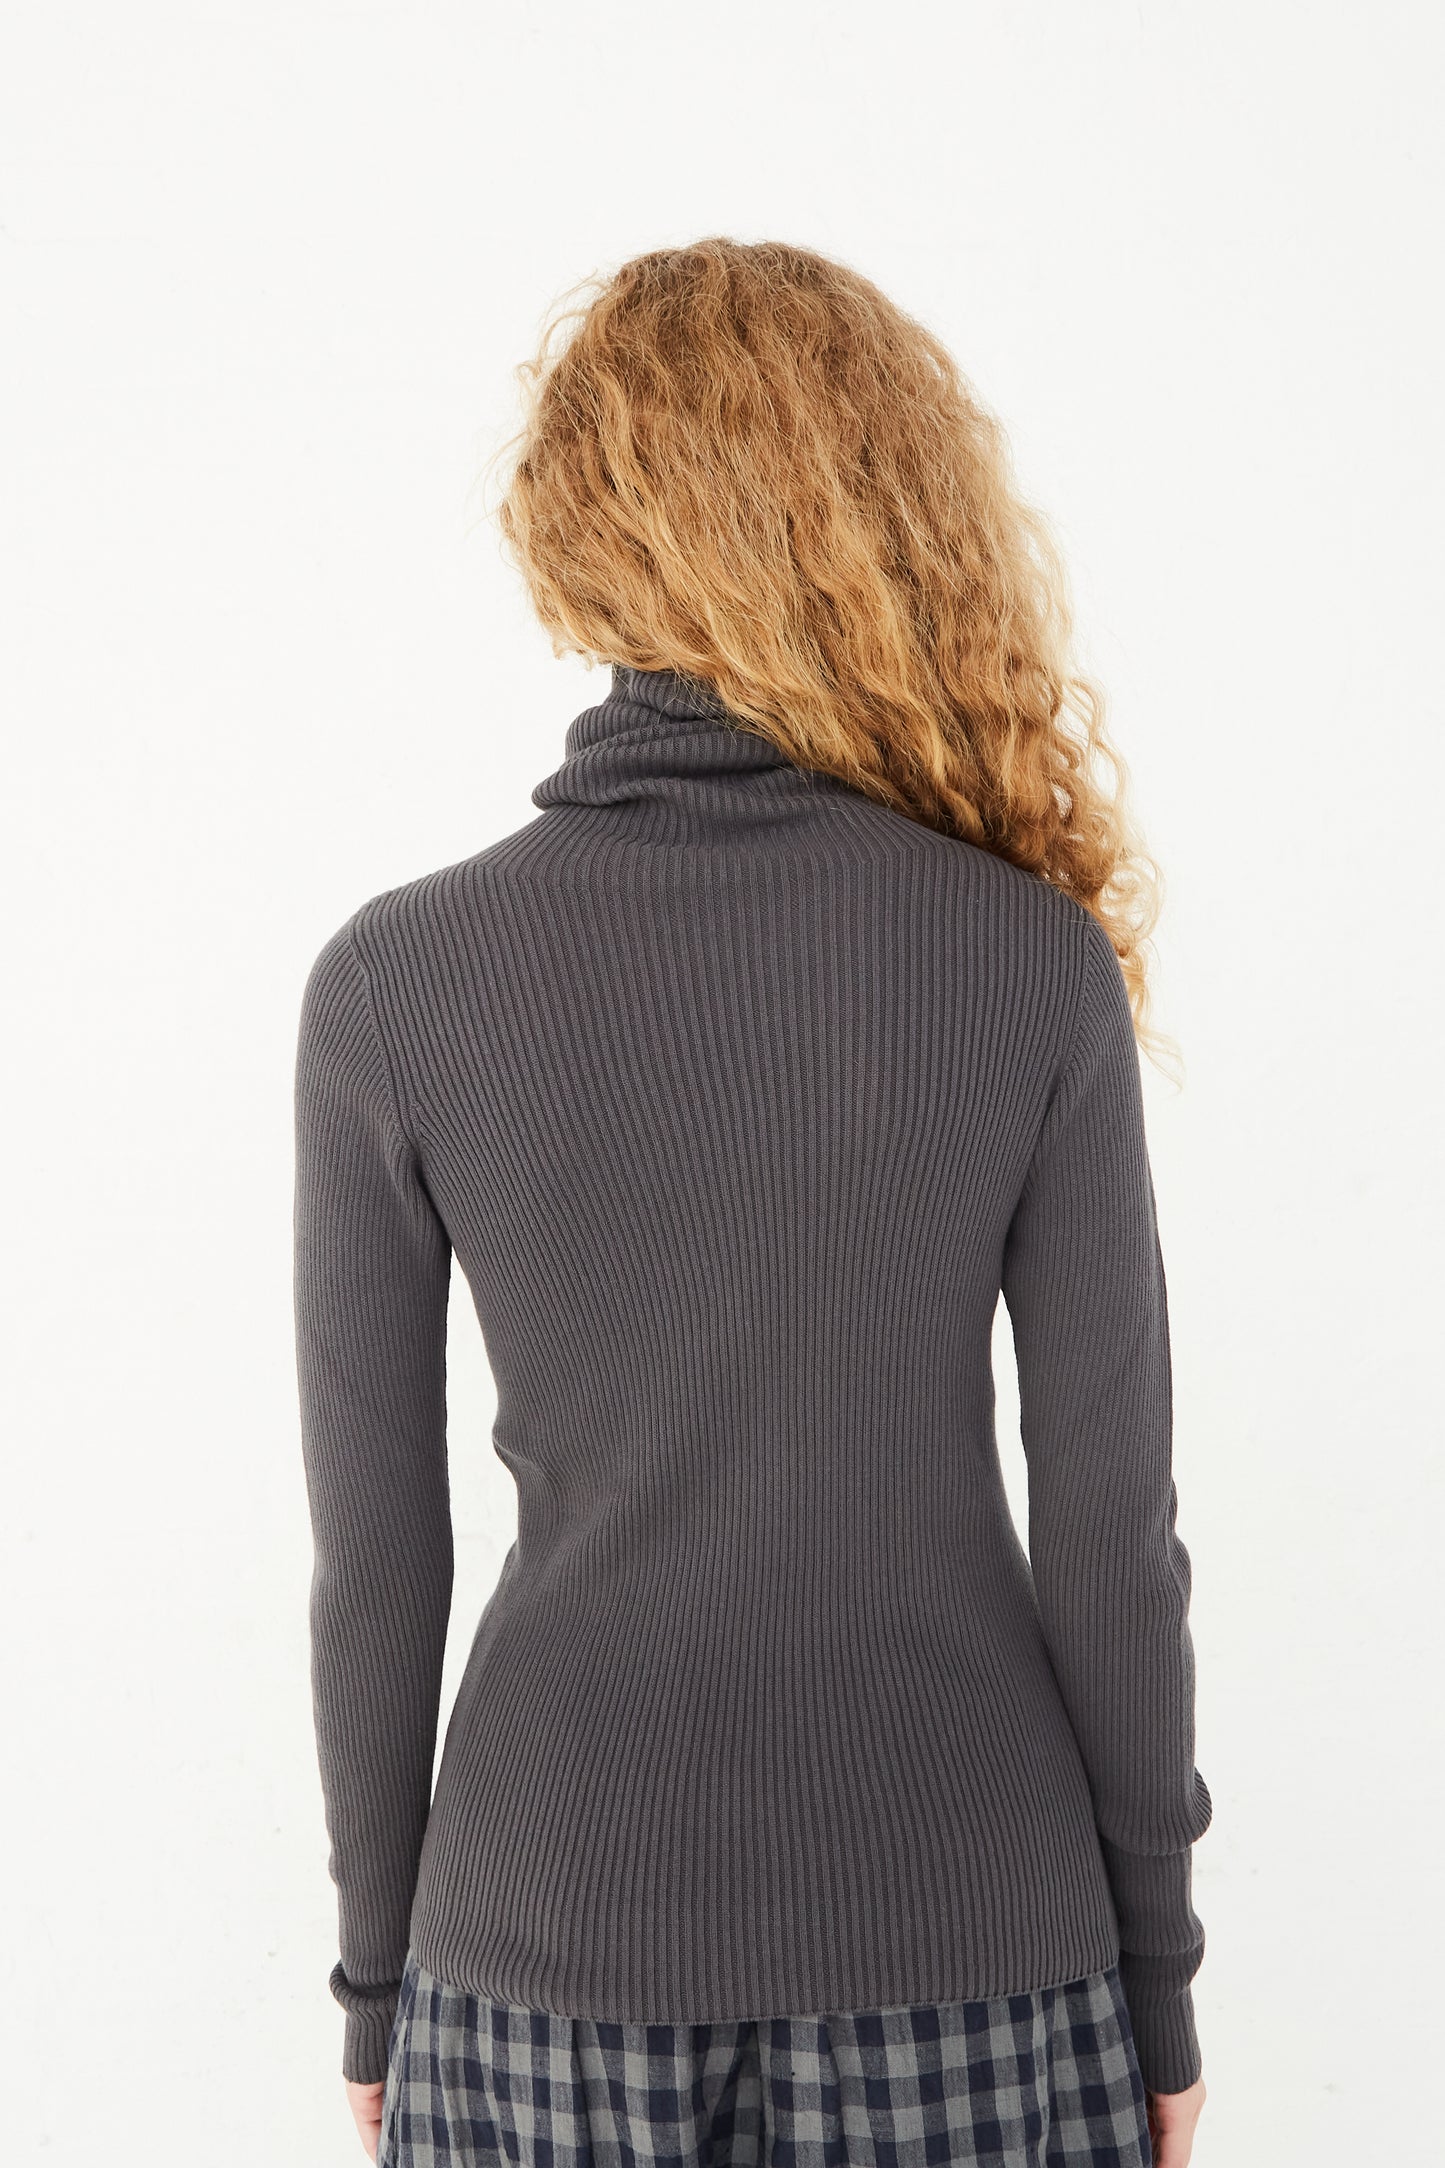 The back view of a model wearing a Ichi Antiquités Rib Turtleneck in Charcoal.